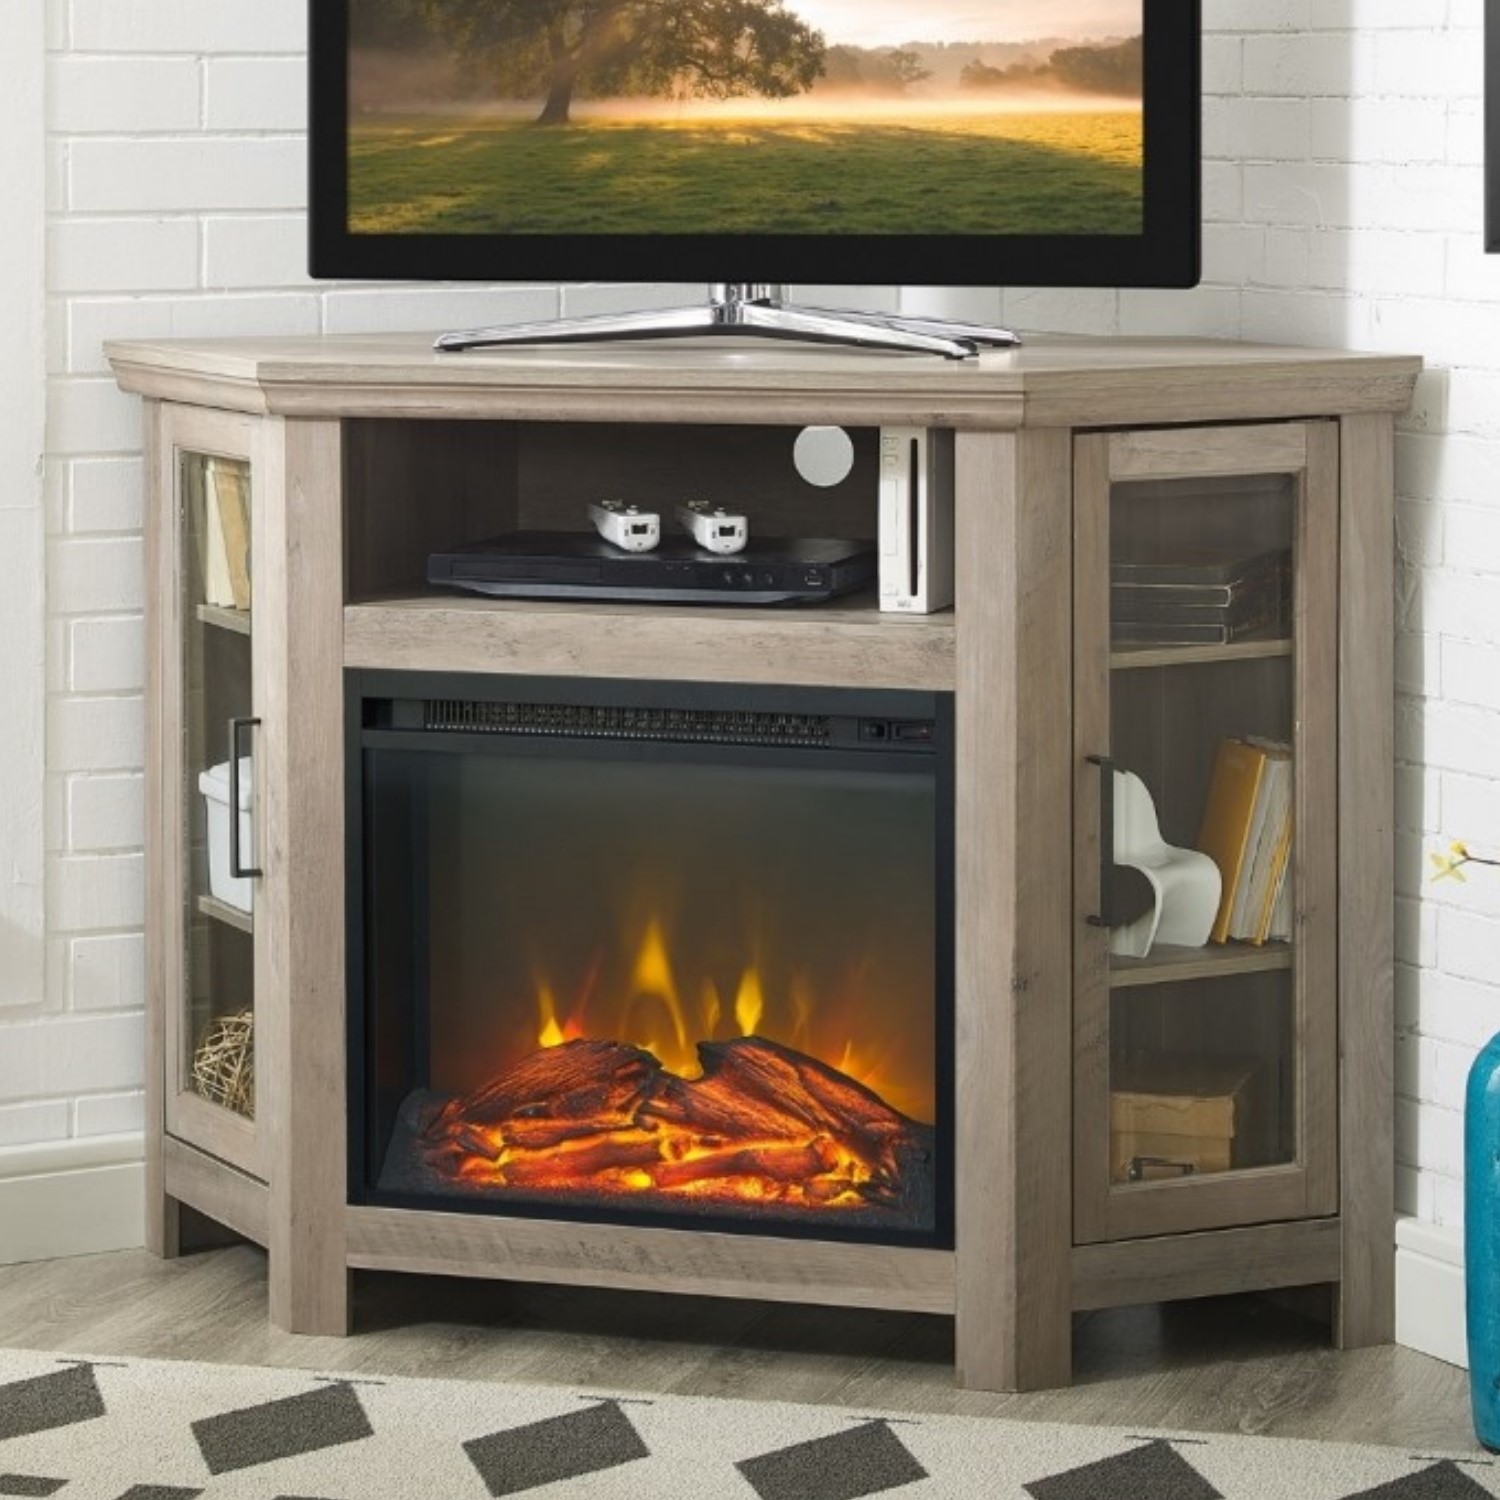 Foster Limewash Wood Corner TV Unit with Electric Fire Insert & Storage Cupboards - TV's up to 56